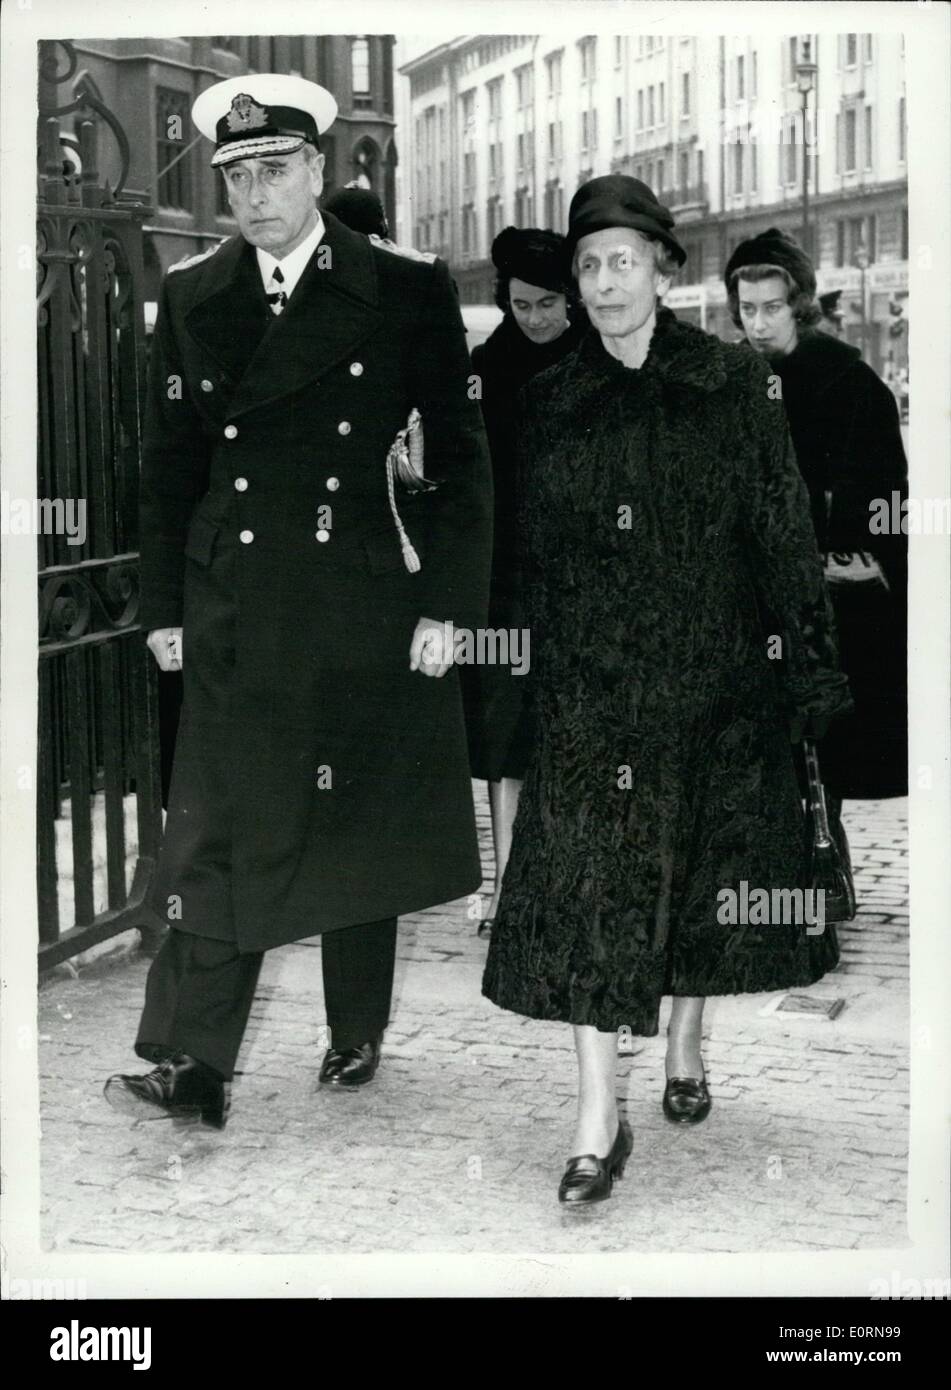 Mar. 03, 1960 - Countess Mountbatten Memorial Service at the Abbey: A Memorial service for Countess Mountbatten was held this morning at Westminster Abbey. Photo shows Earl Mountbatten escorts Queen Louise of sweden - followed by his two daughters - as they arrive for the service this morning. Stock Photo